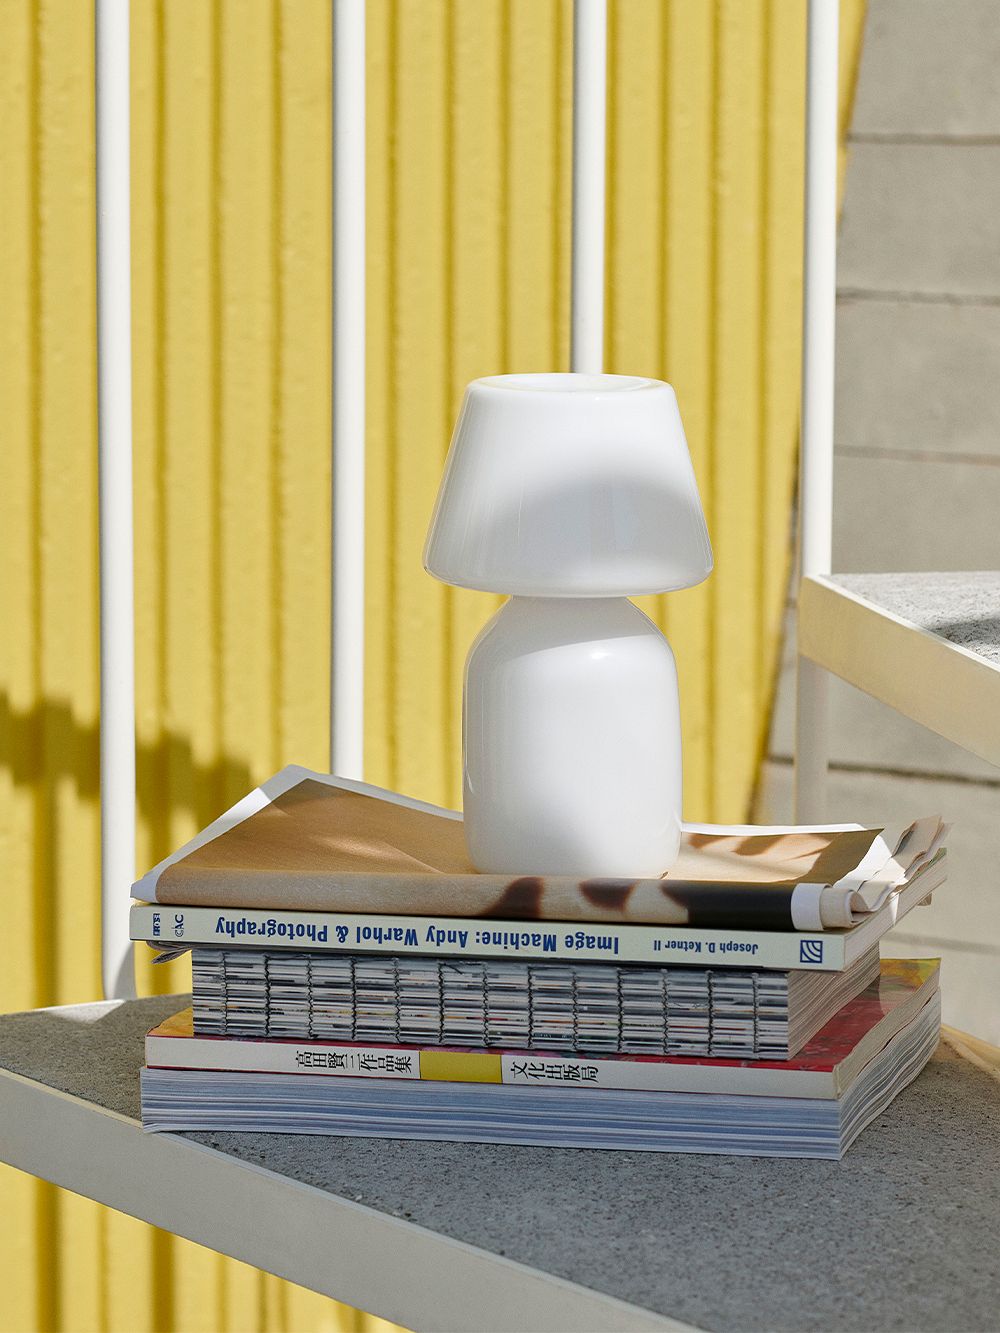 HAY’s opal white Apollo table lamp stands on top of magazines outdoors in the sunshine.